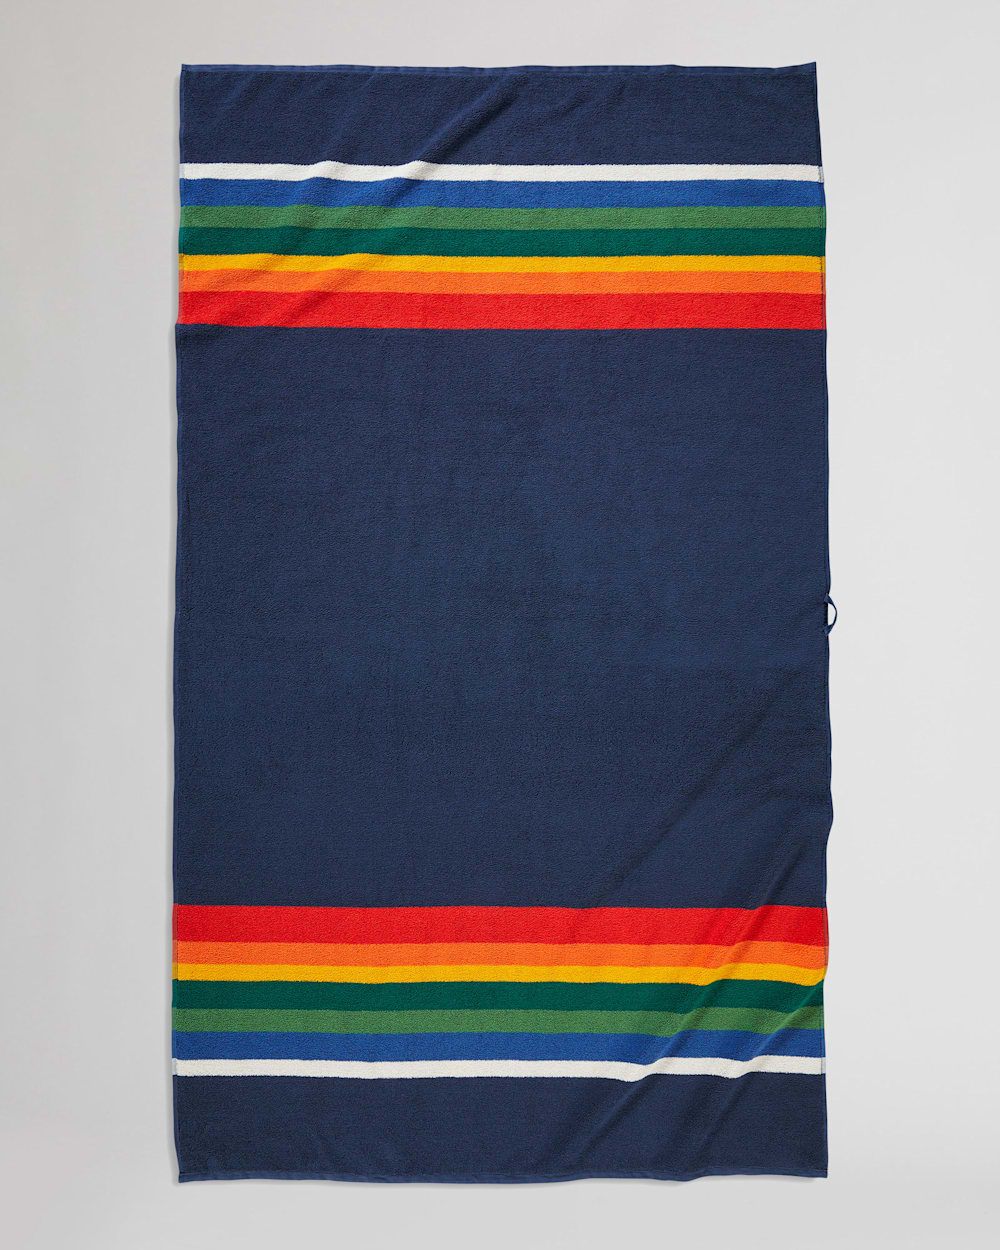 ALTERNATE VIEW OF CRATER LAKE NATIONAL PARK SPA TOWEL IN NAVY image number 2